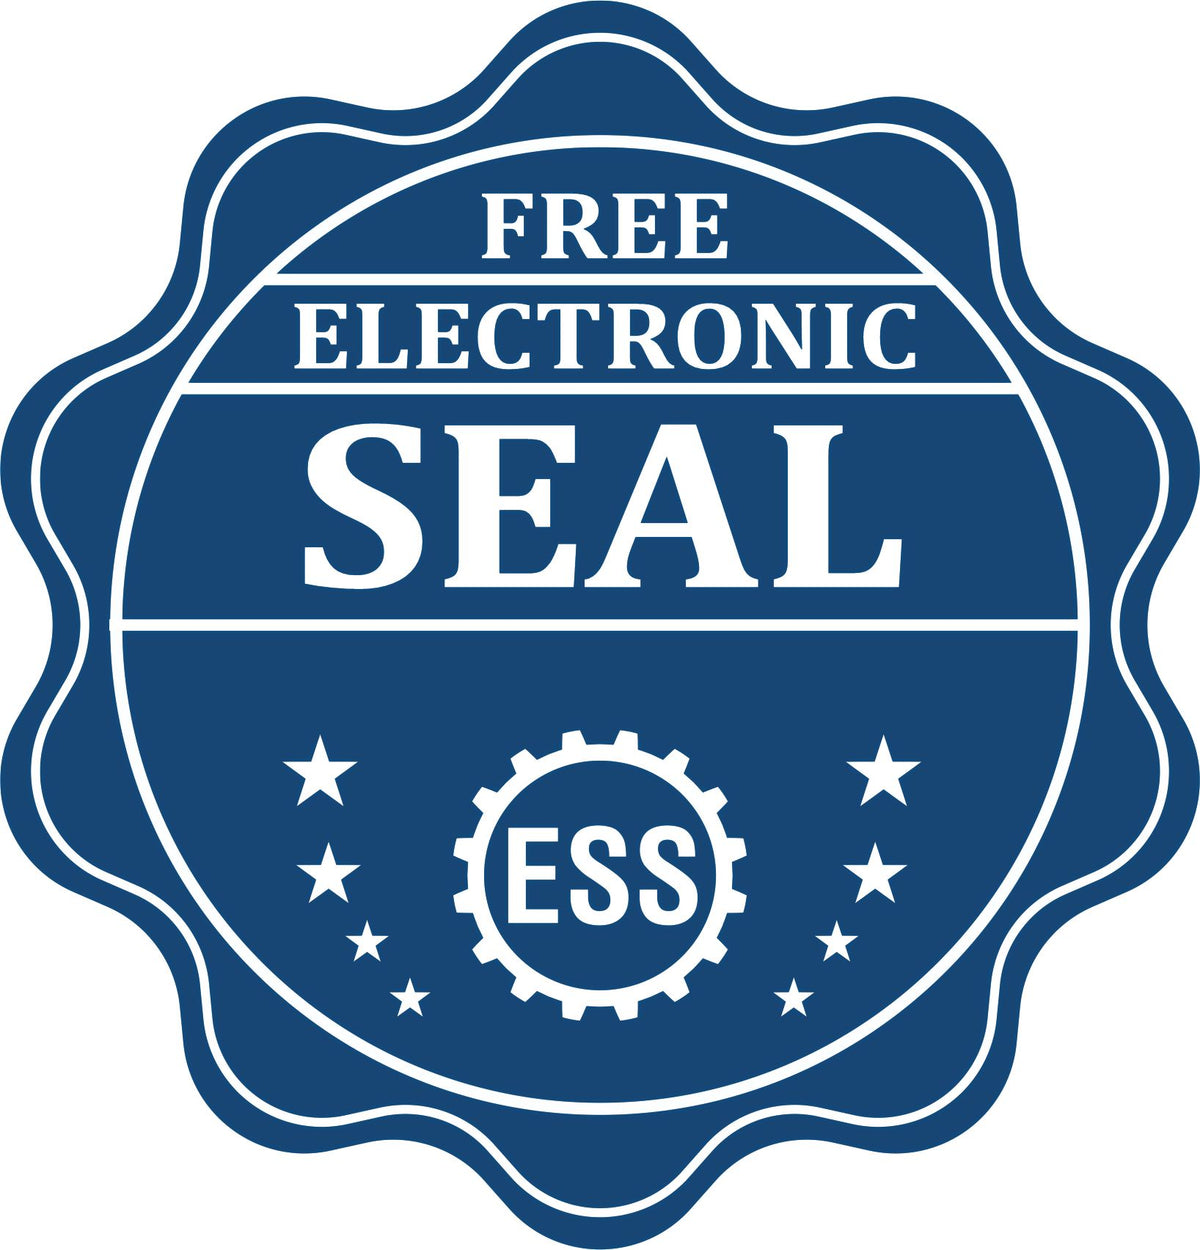 A badge showing a free electronic seal for the Hybrid Arkansas Geologist Seal with stars and the ESS gear on the emblem.